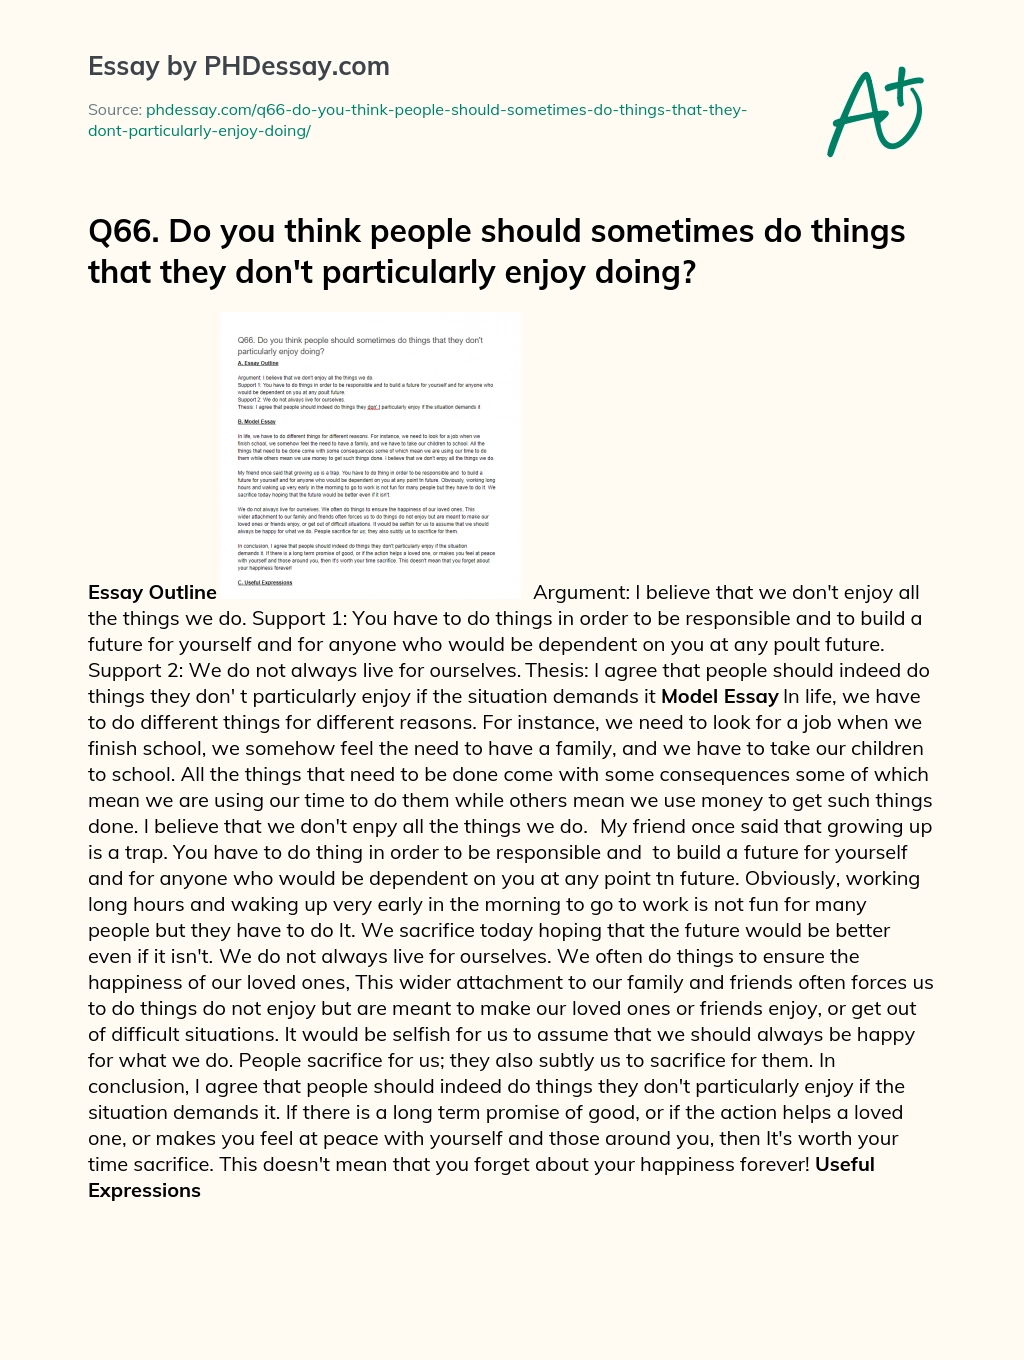 Q66. Do you think people should sometimes do things that they don’t particularly enjoy doing? essay